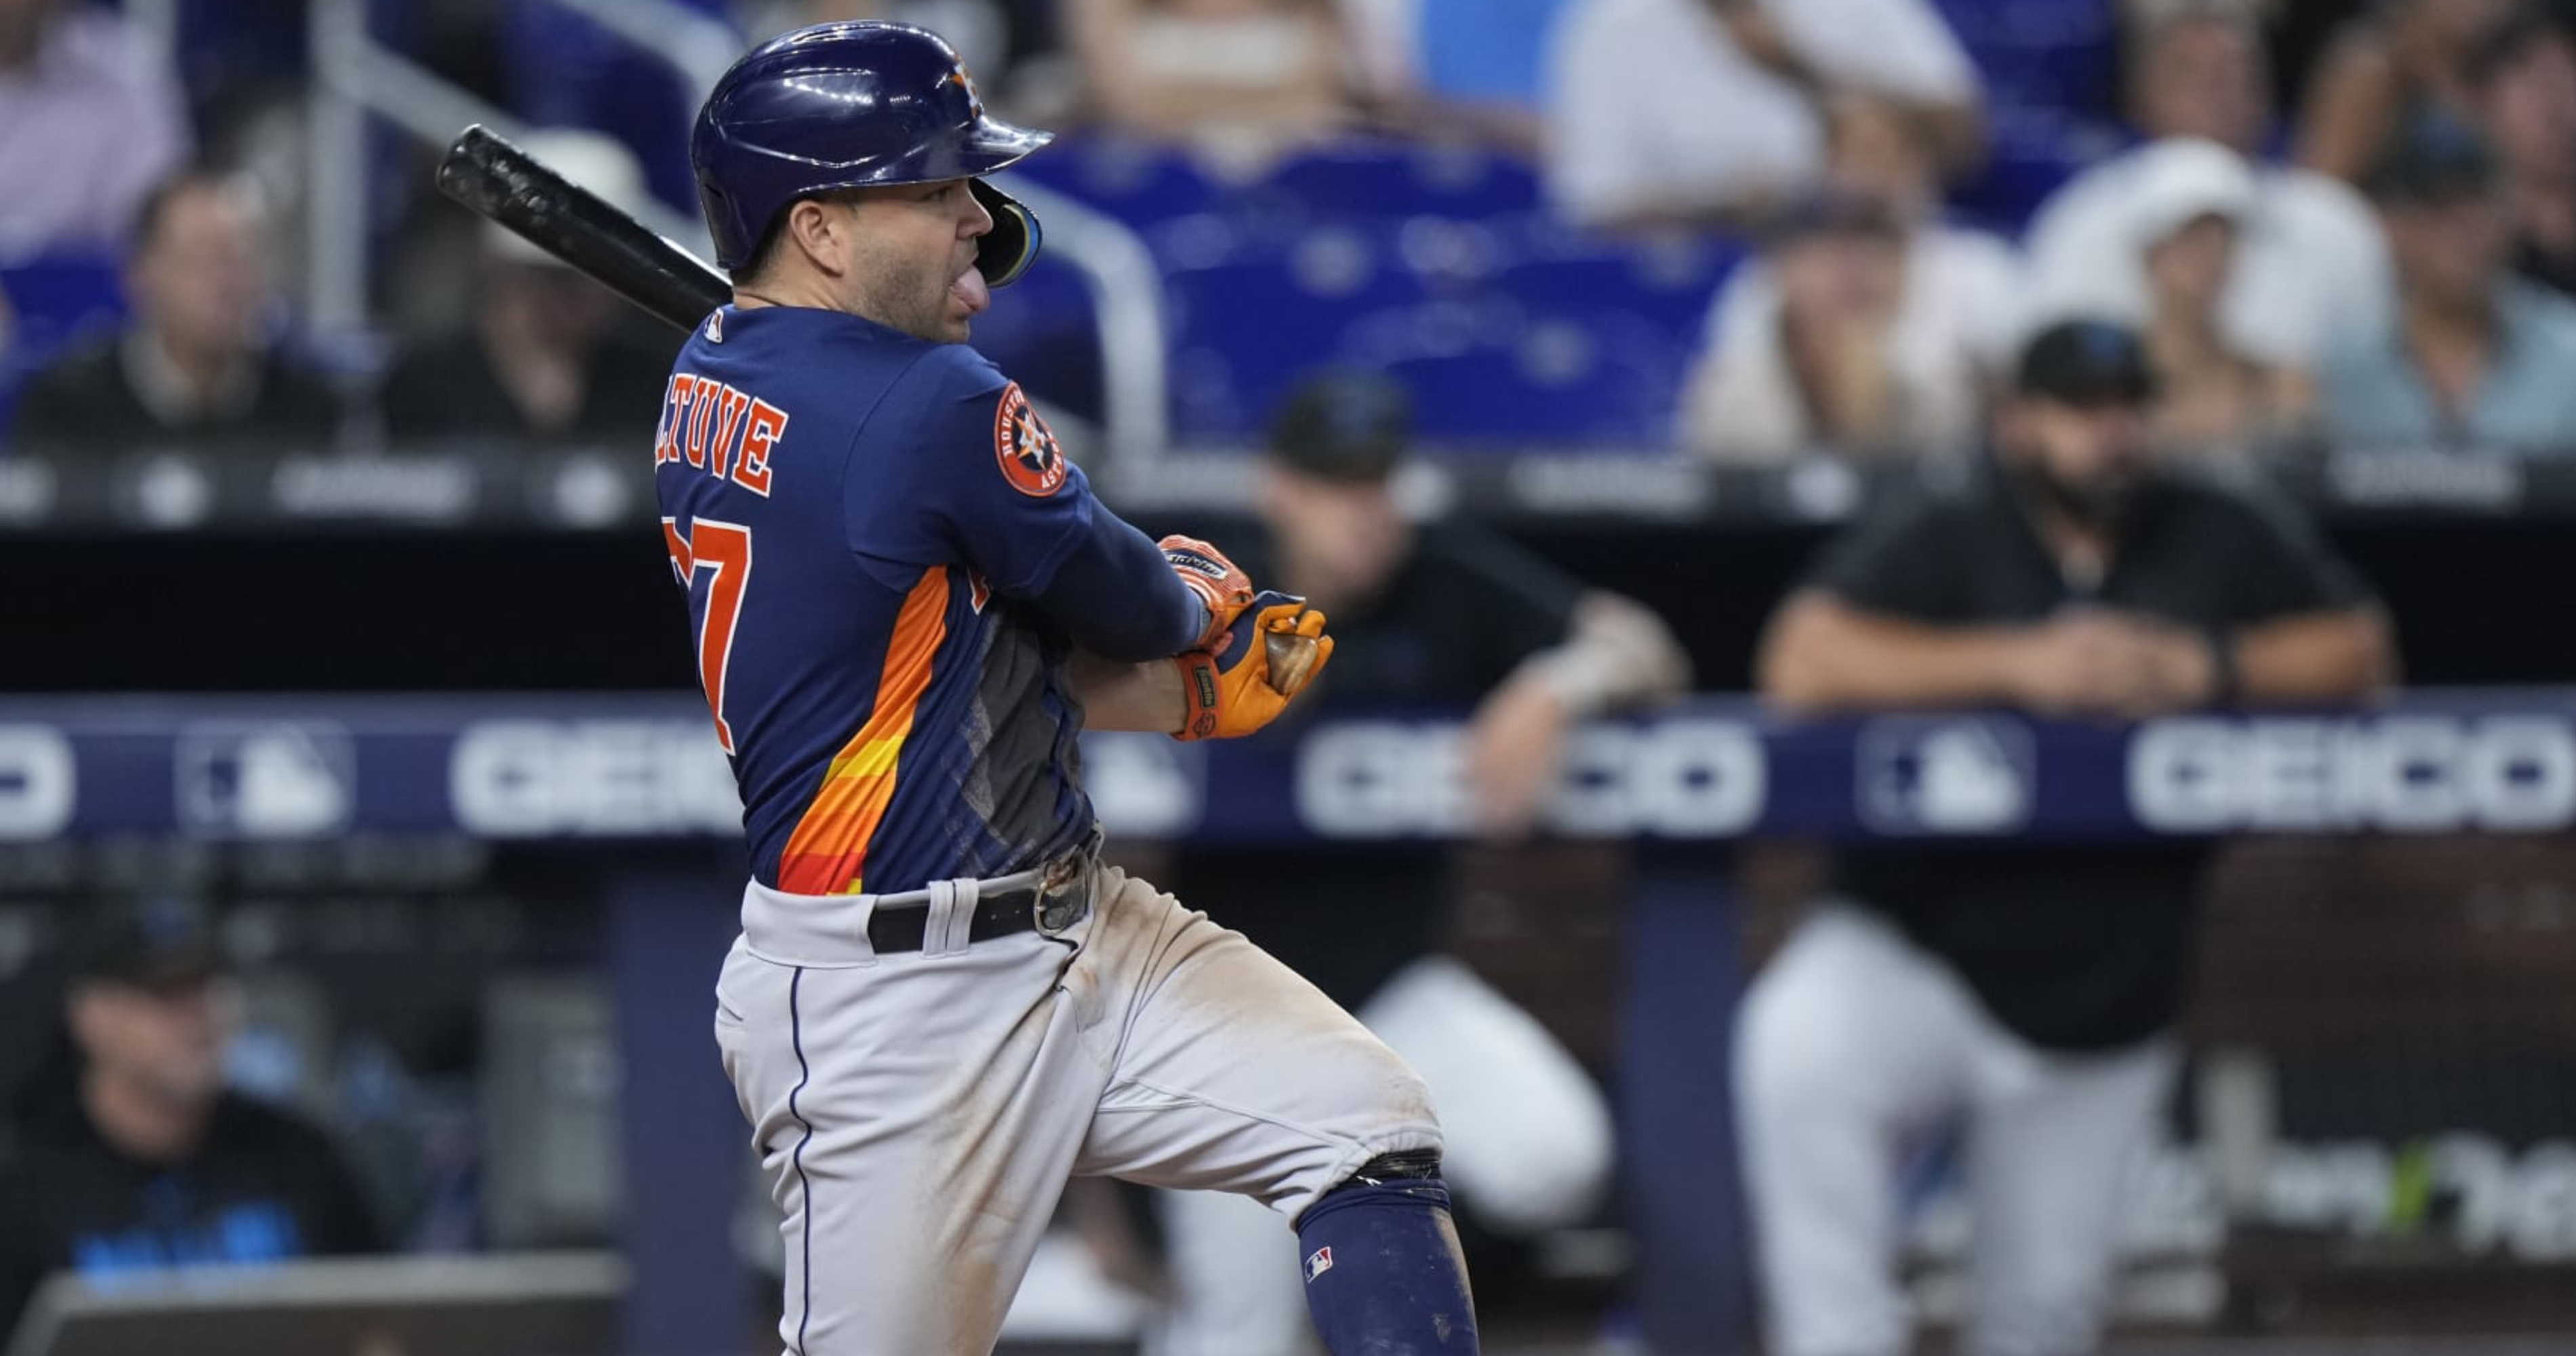 Astros' Jose Altuve Exits with Leg Injury After Fouling Pitch off